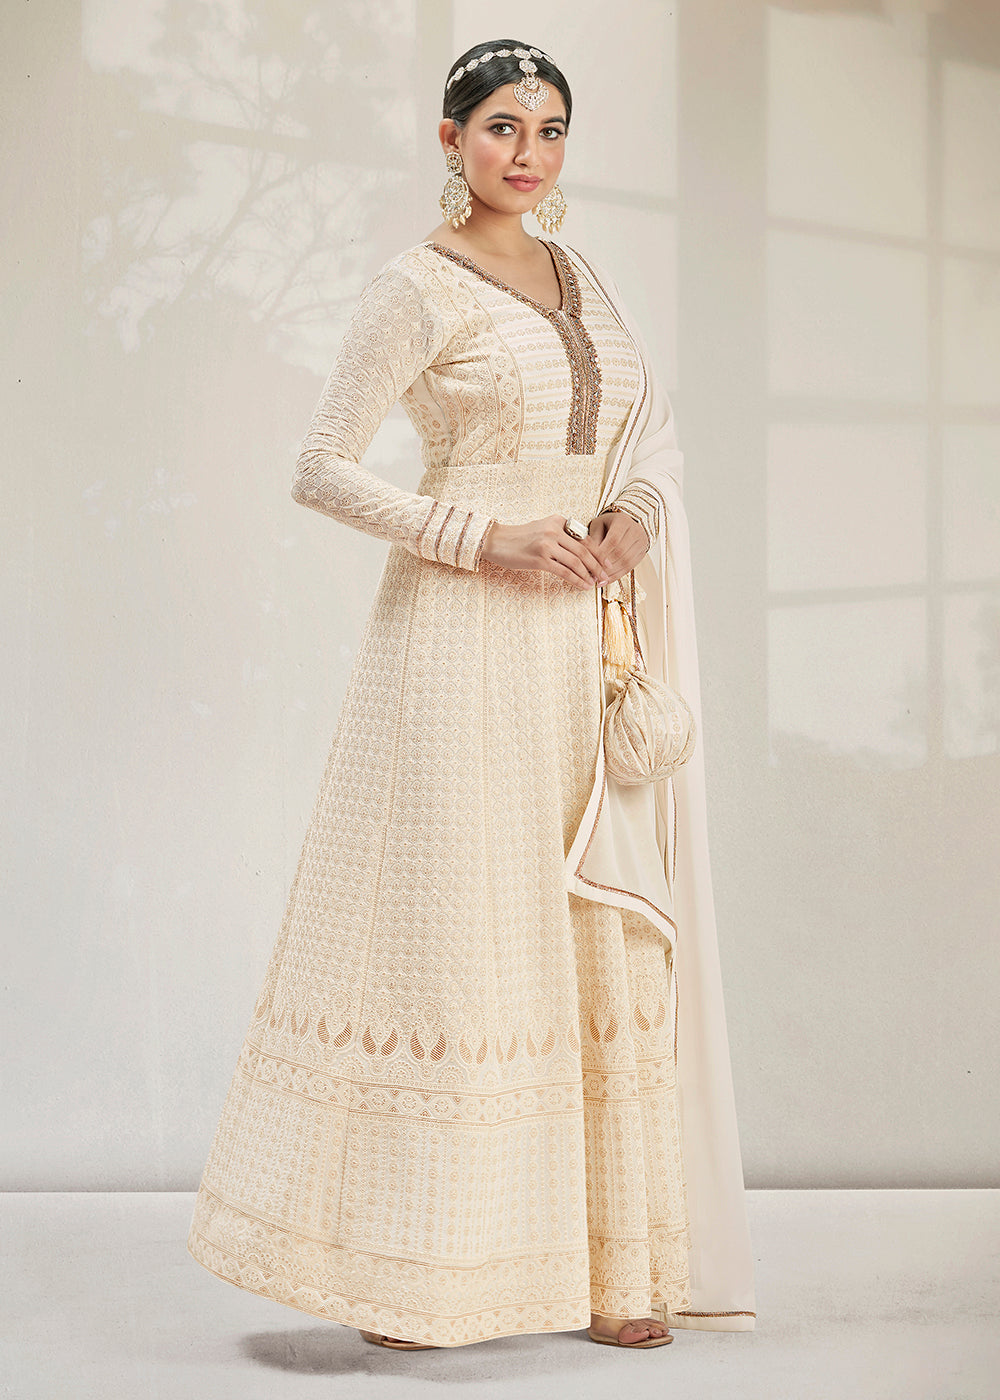 Buy Now Glittering Party Style Pearl White Traditional Embroidered Anarkali Suit Online in USA, UK, Australia, New Zealand, Canada & Worldwide at Empress Clothing.